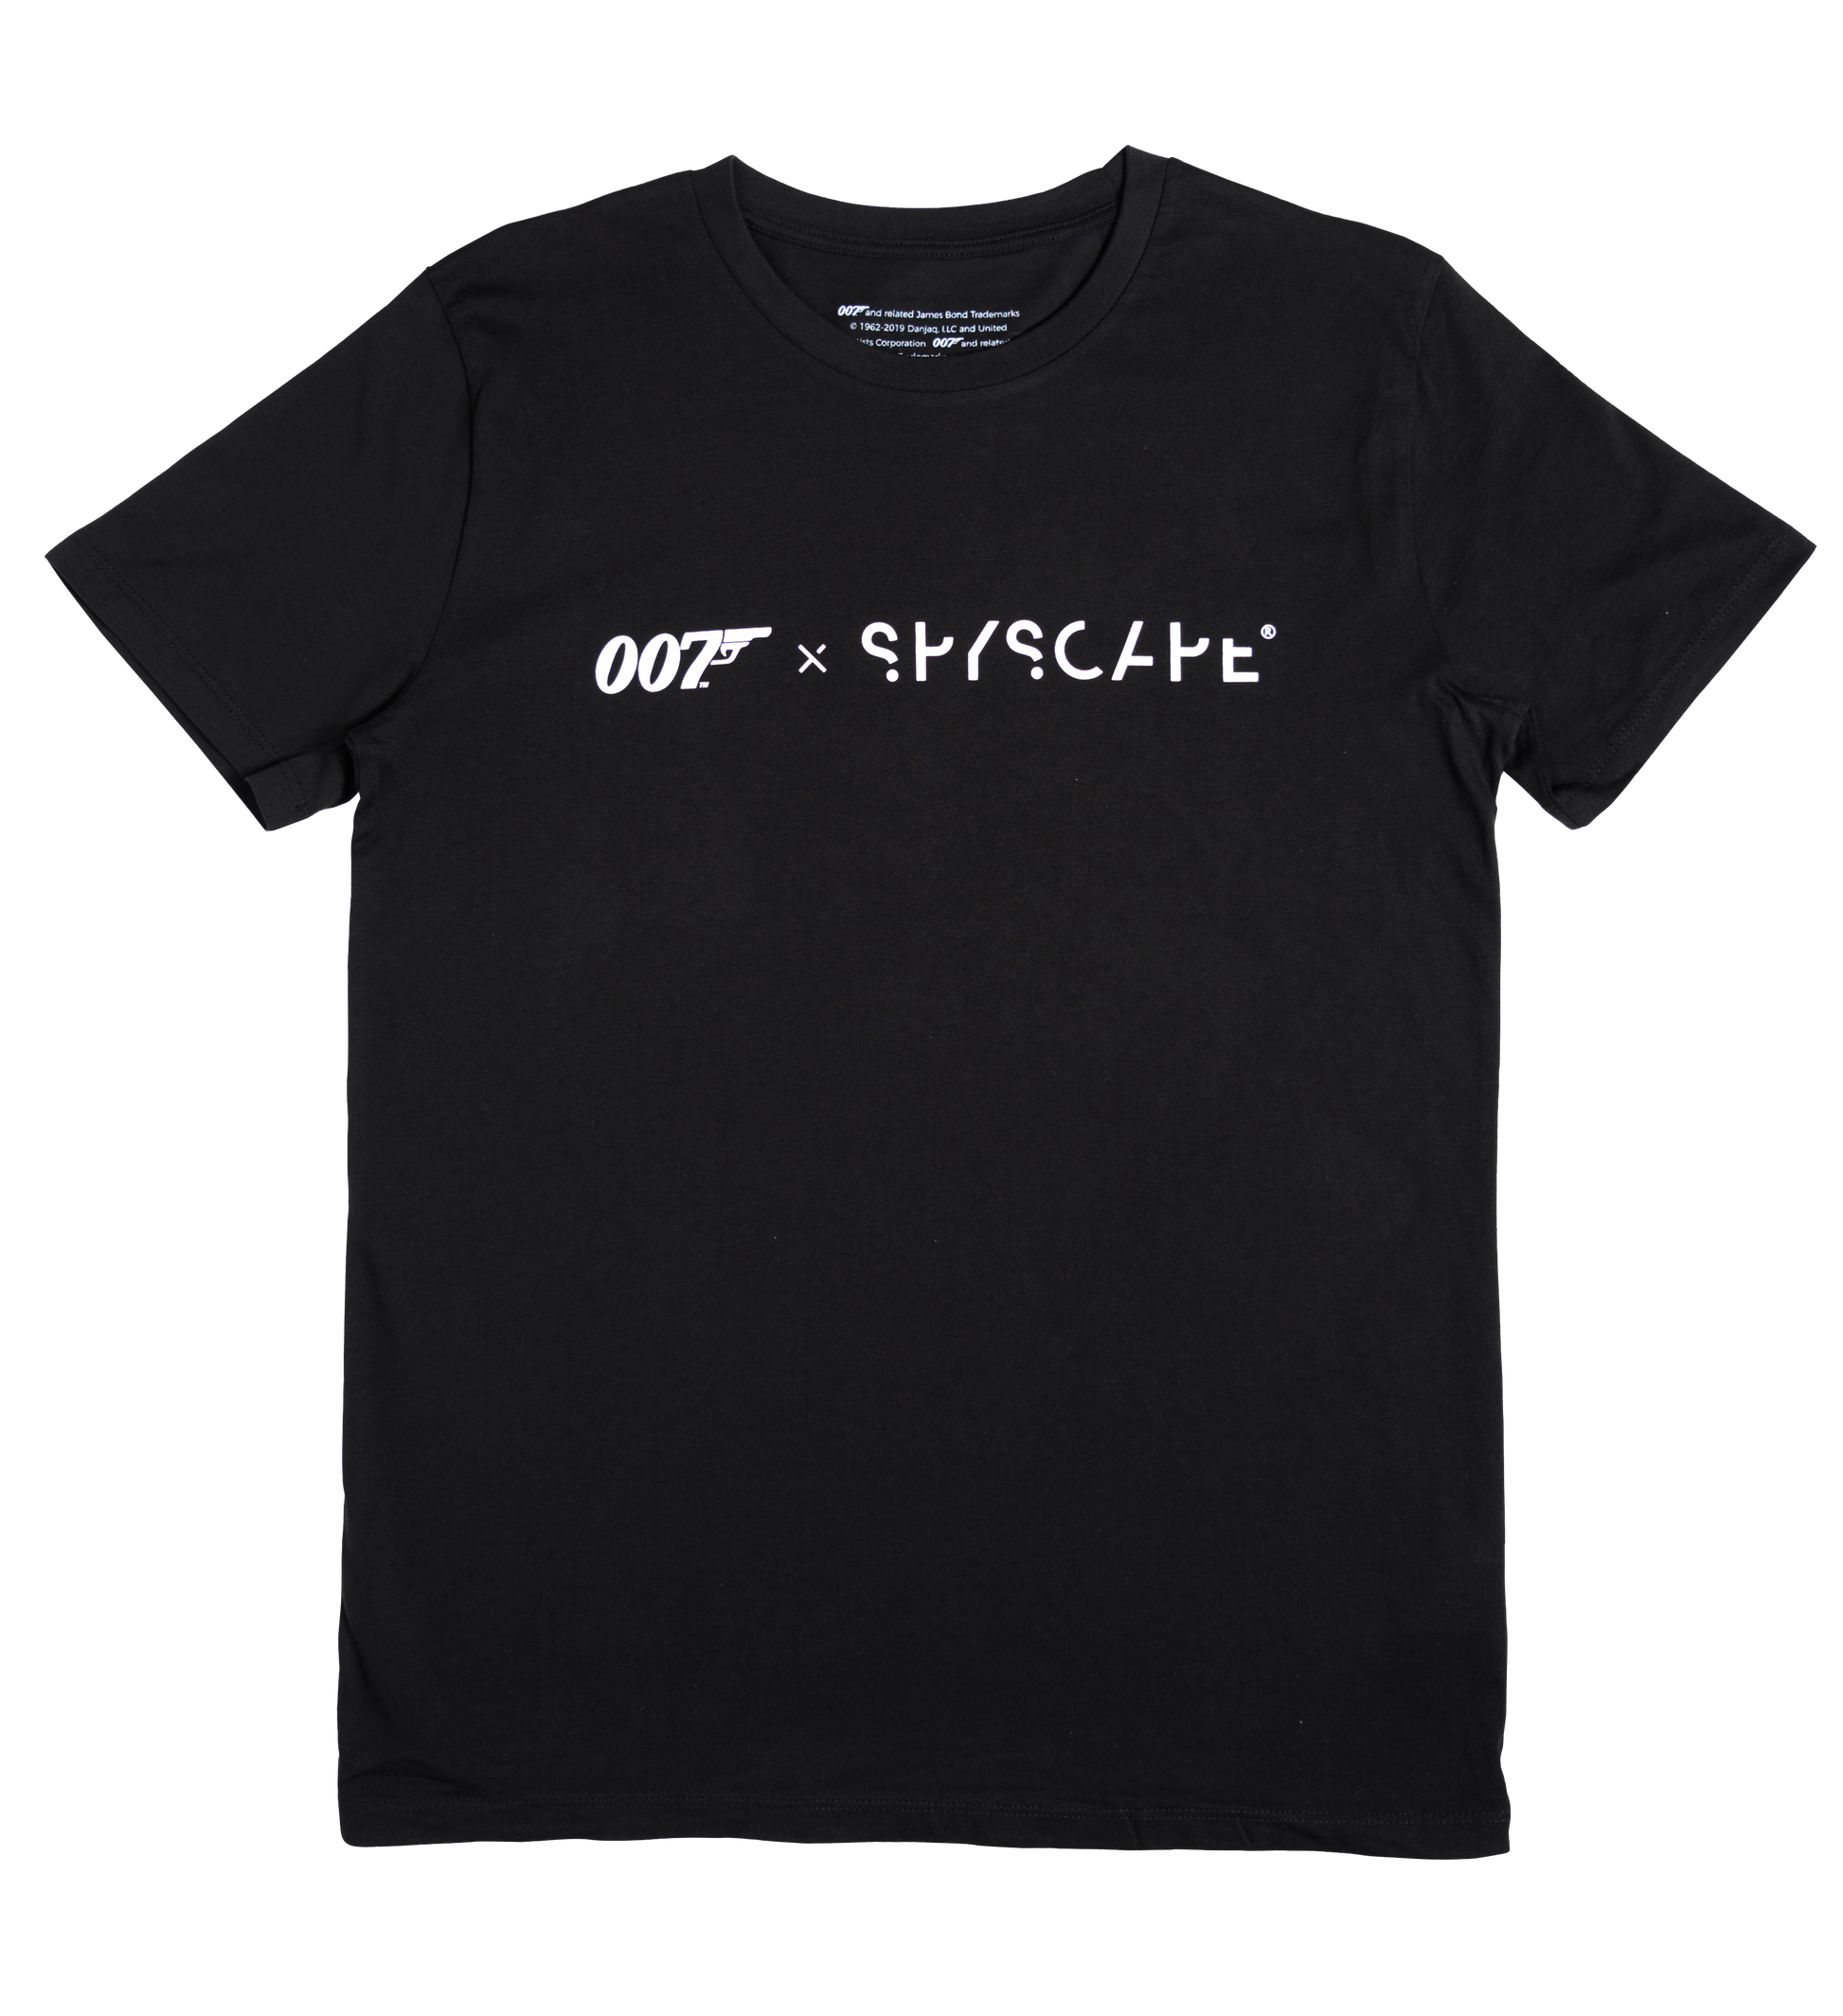 007 x SPYSCAPE T-Shirt - Front view of black 007 x Spyscape T-shirt Small 